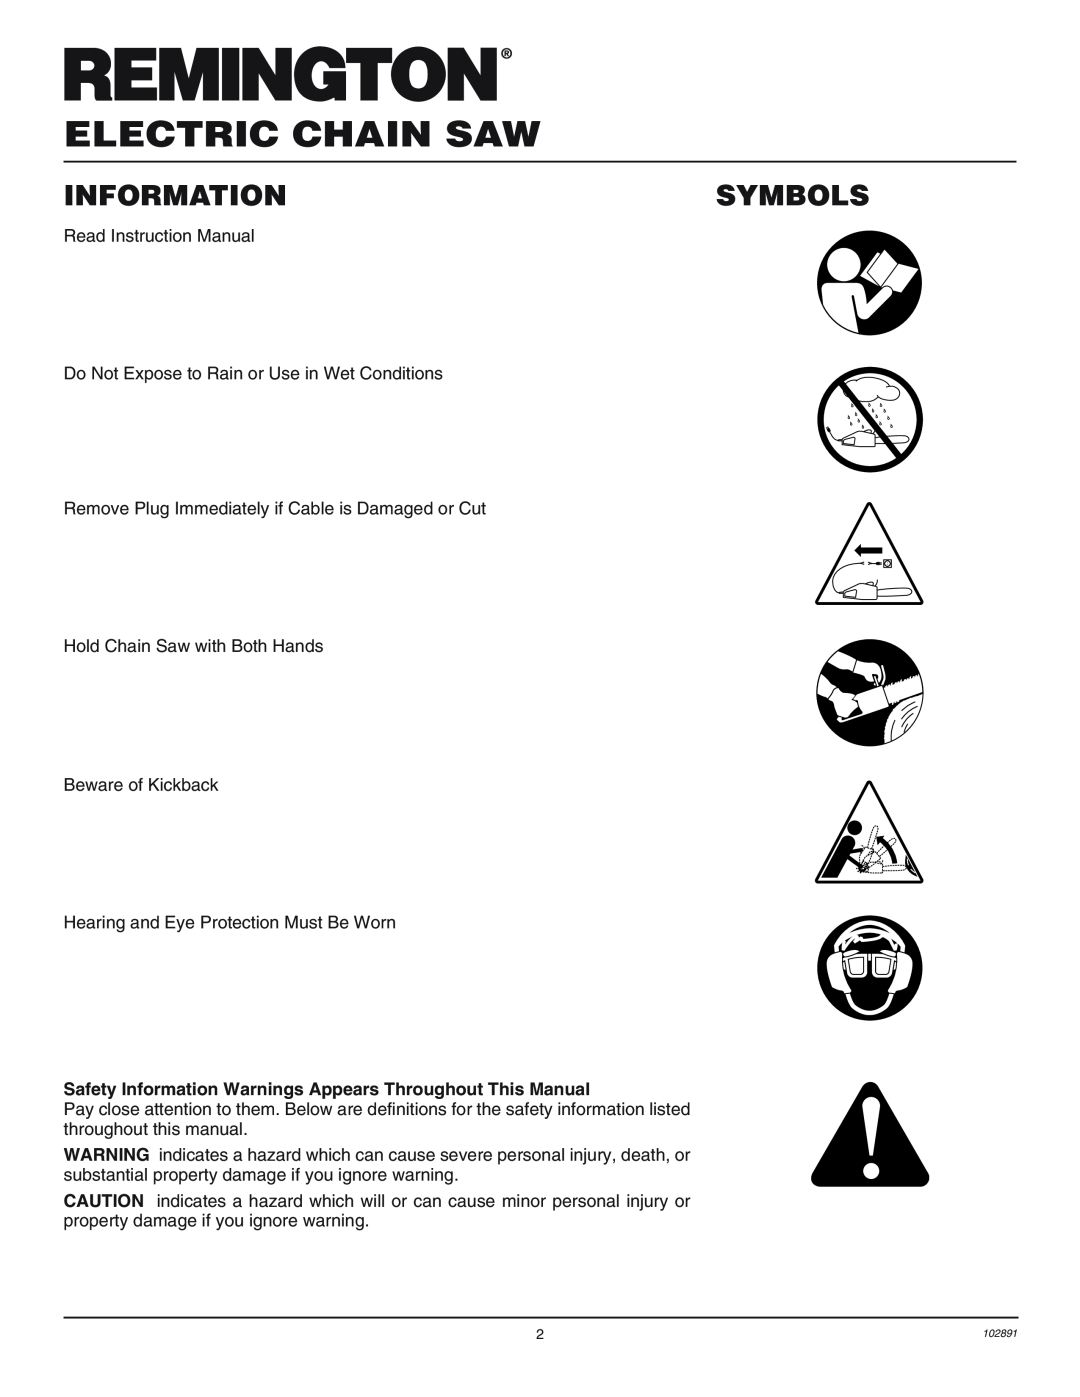 Desa 100271-01 owner manual Electric Chain Saw, Symbols, Safety Information Warnings Appears Throughout This Manual 